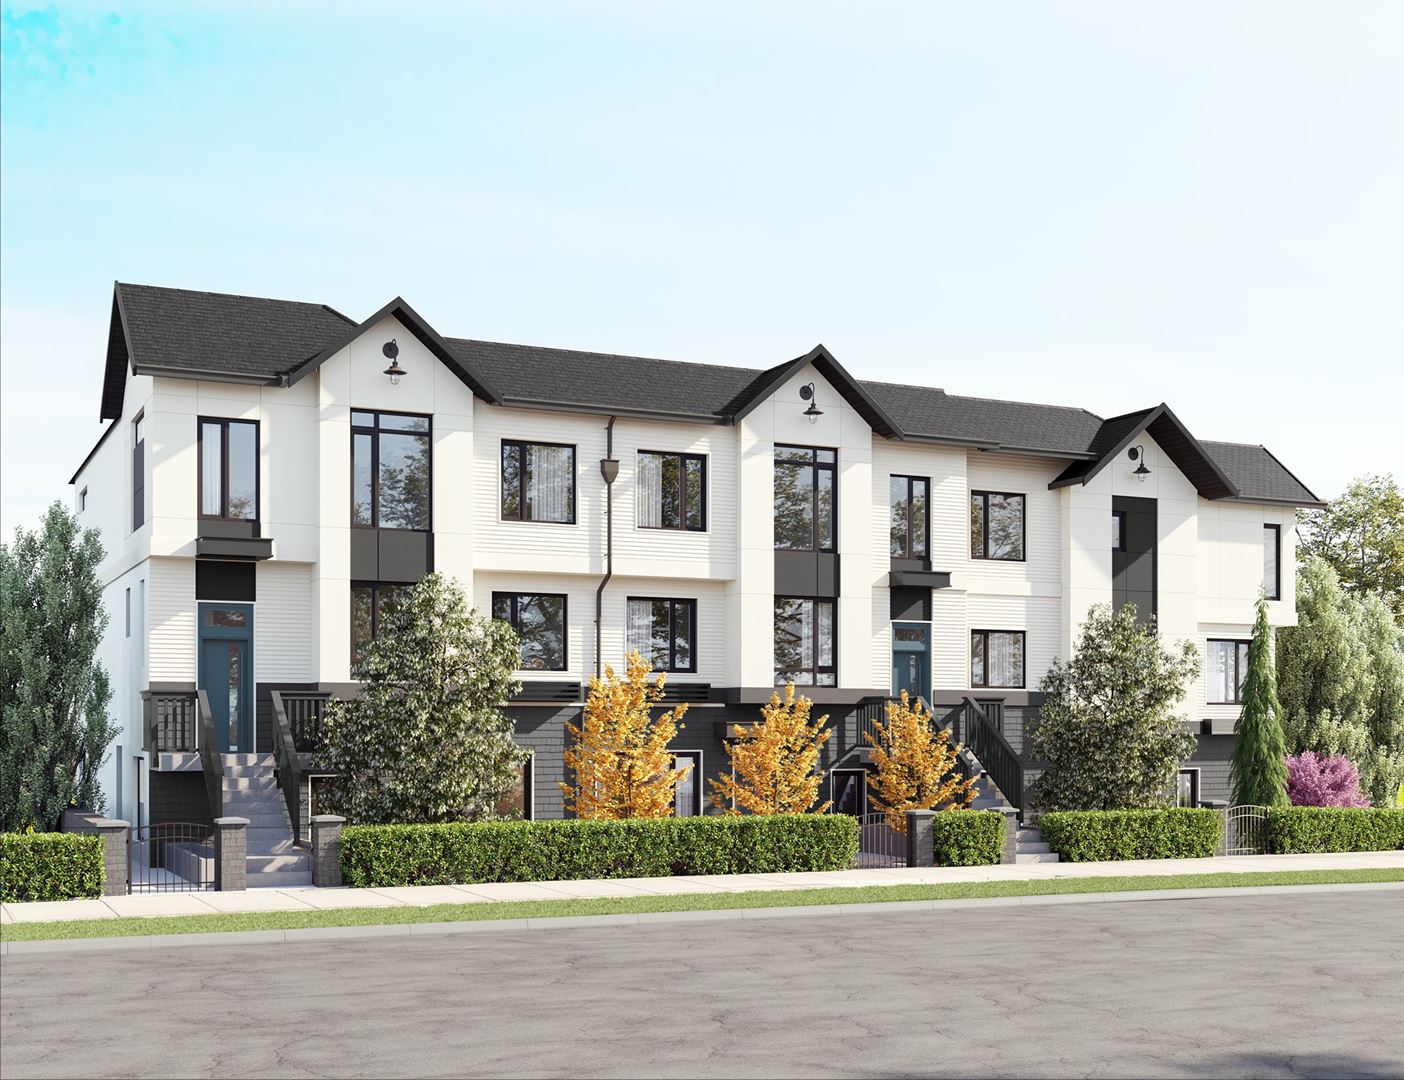 A photo of The Hillcrest, a new condo and townhome development